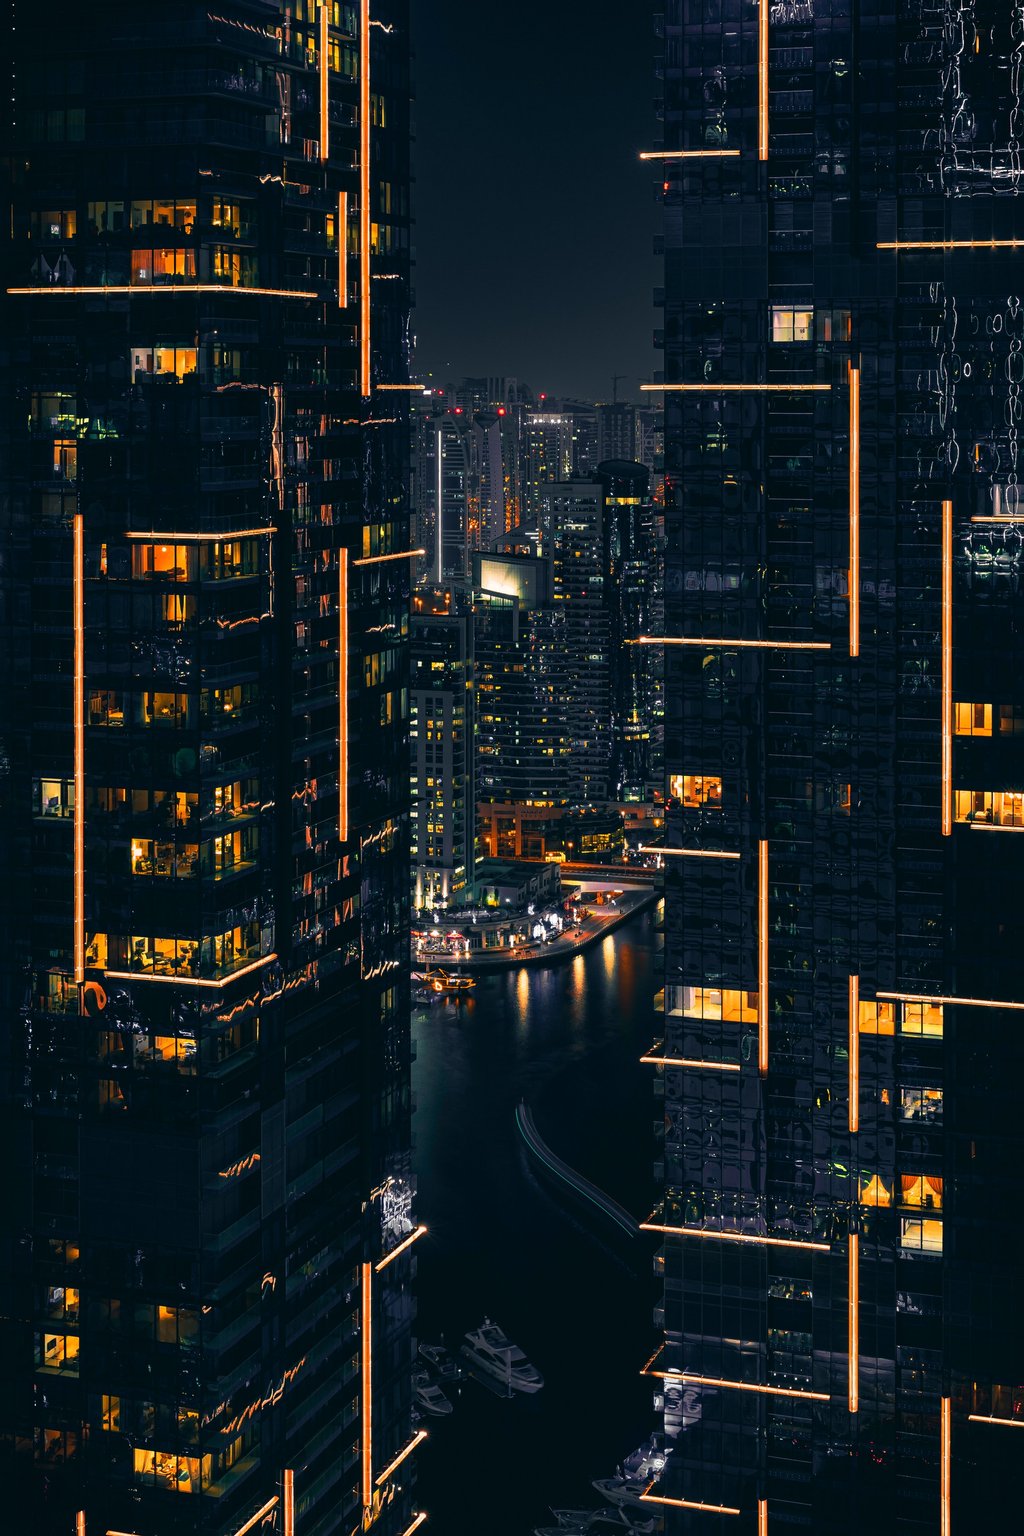 Buildings during nighttime with orange lighting and water below